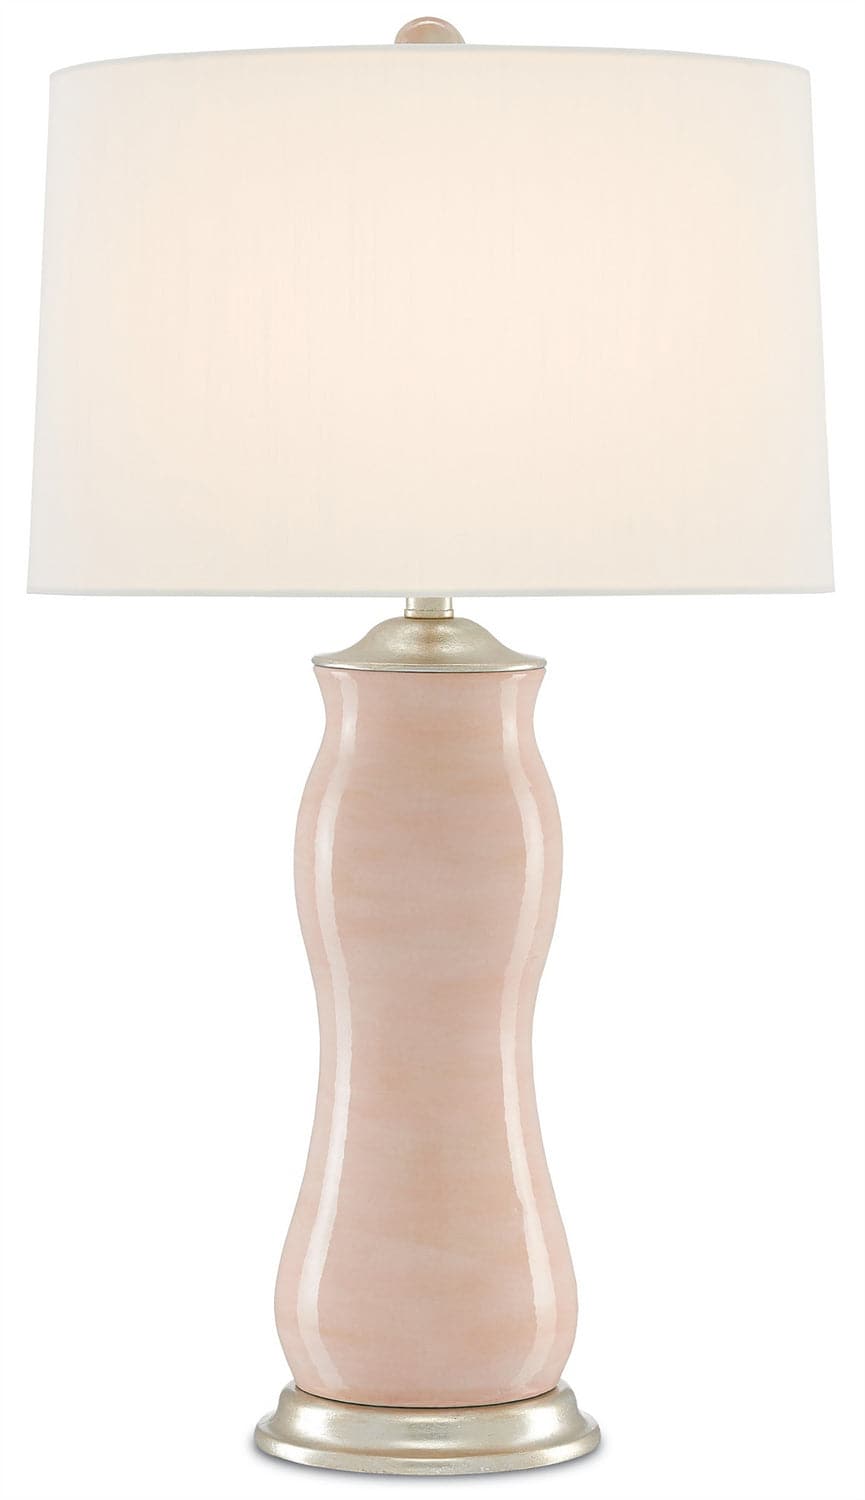 One Light Table Lamp from the Ondine collection in Blush/Silver Leaf finish